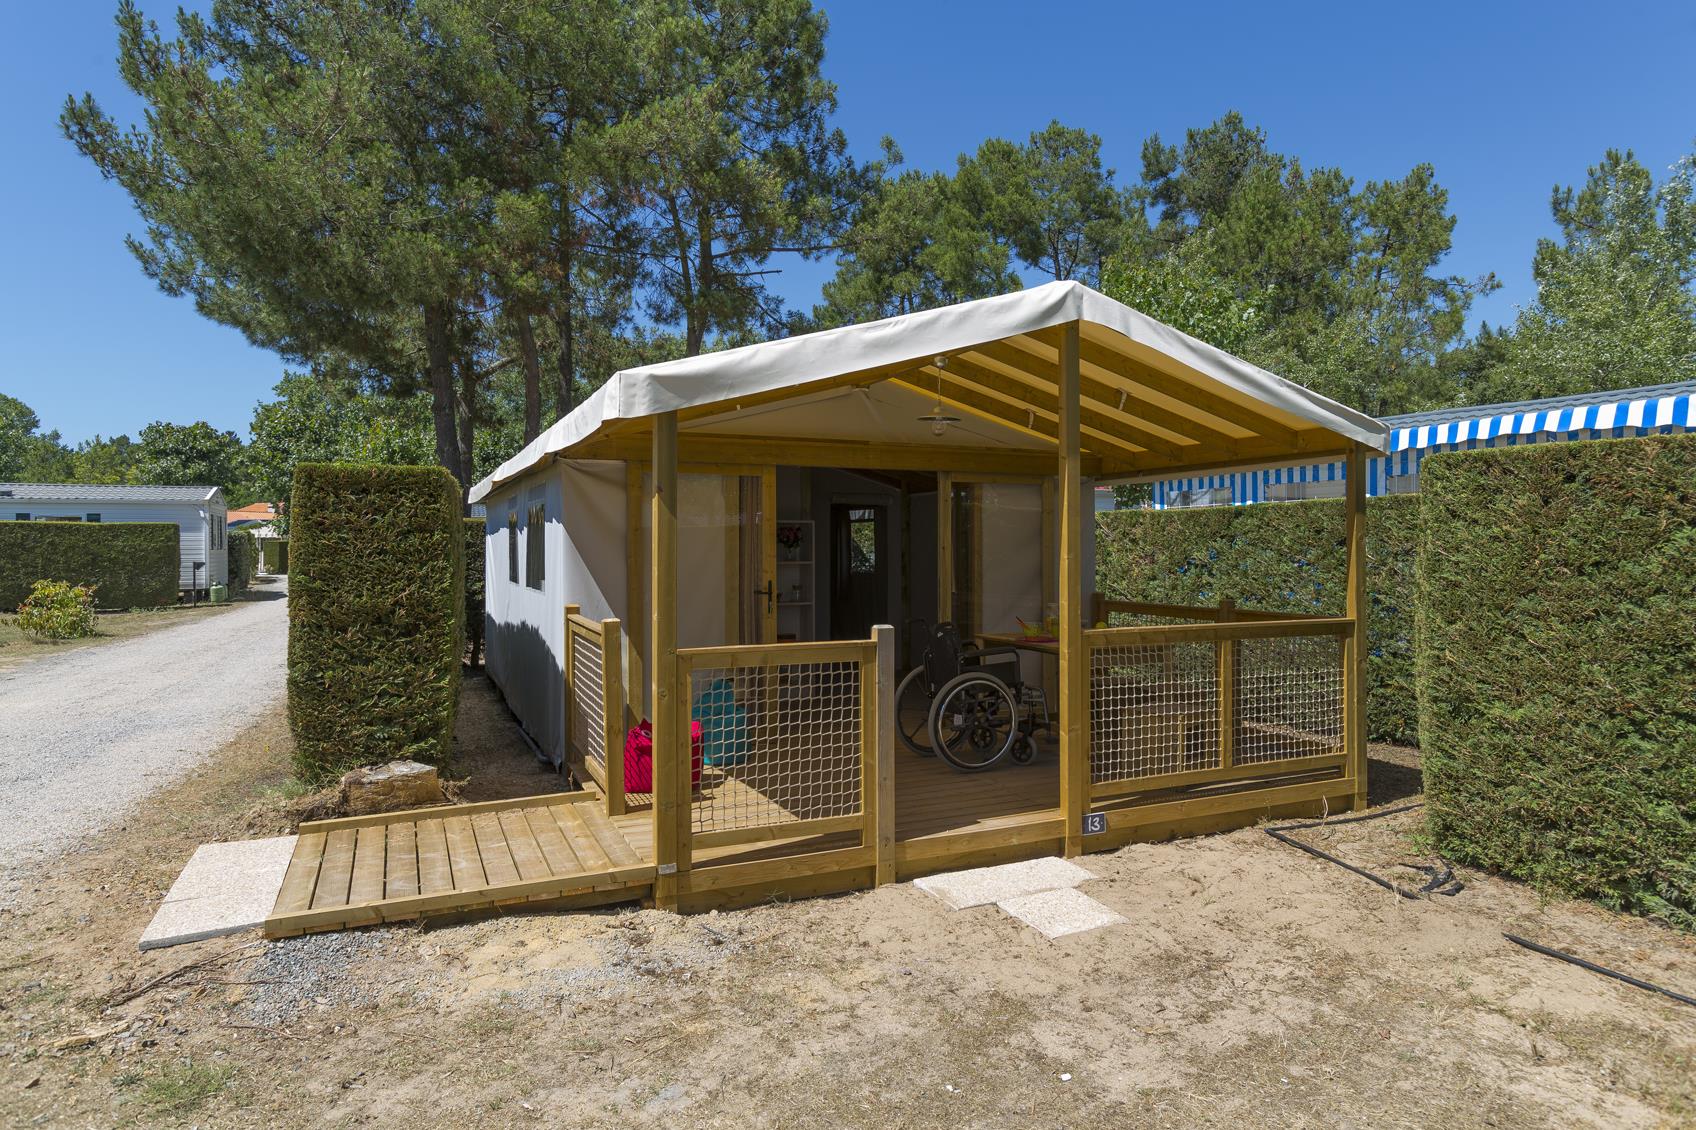 Accommodation - Ecolodge 2 Bedrooms (Adapted To The People With Reduced Mobility) - Camping La Ventouse